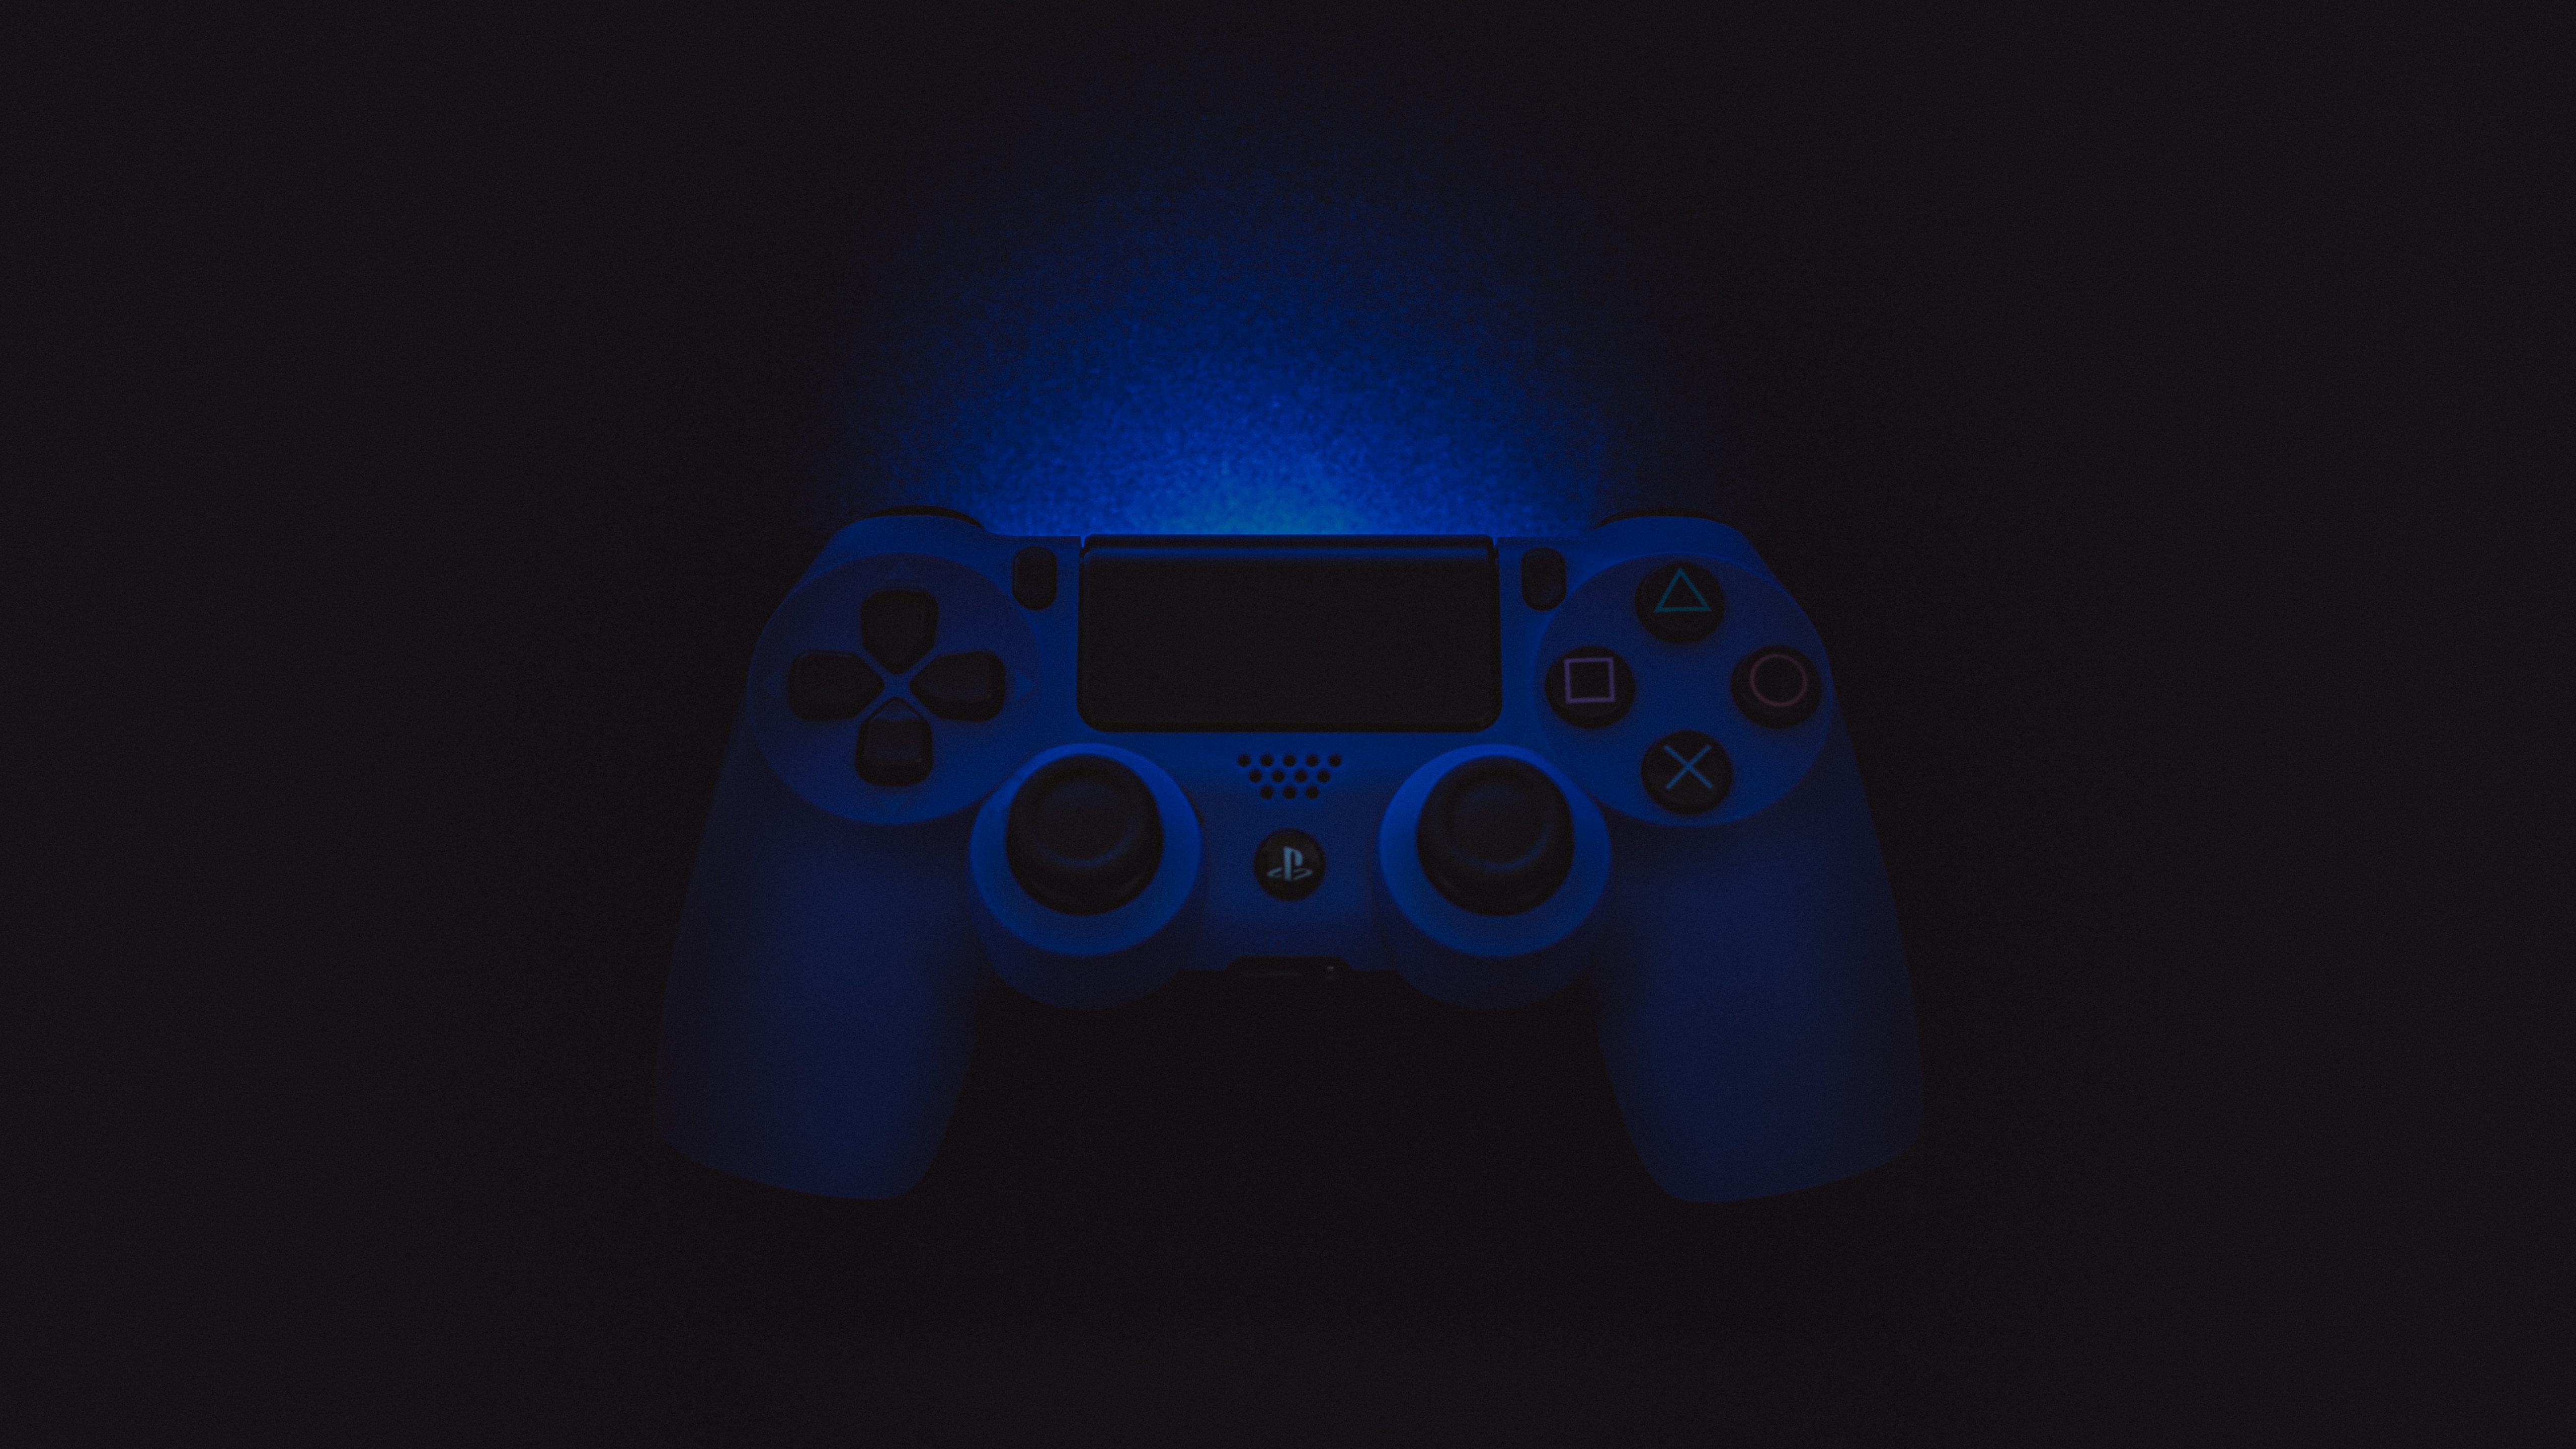 How To Fix That Blinking Blue Light Your PS4 Controller - Sorta Techy